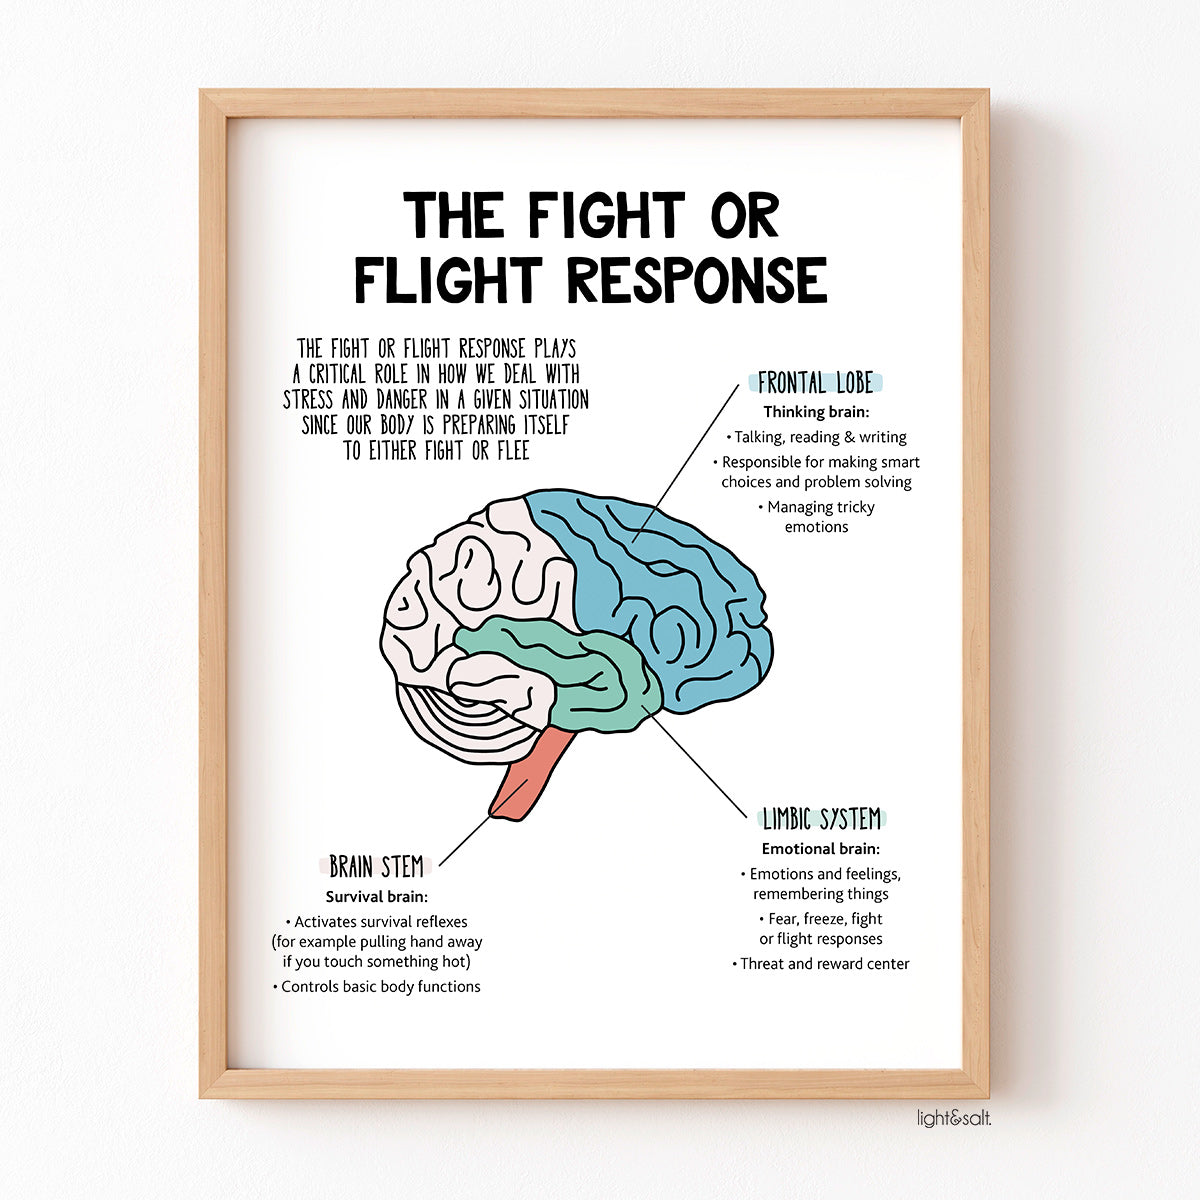 The Fight or Flight response poster